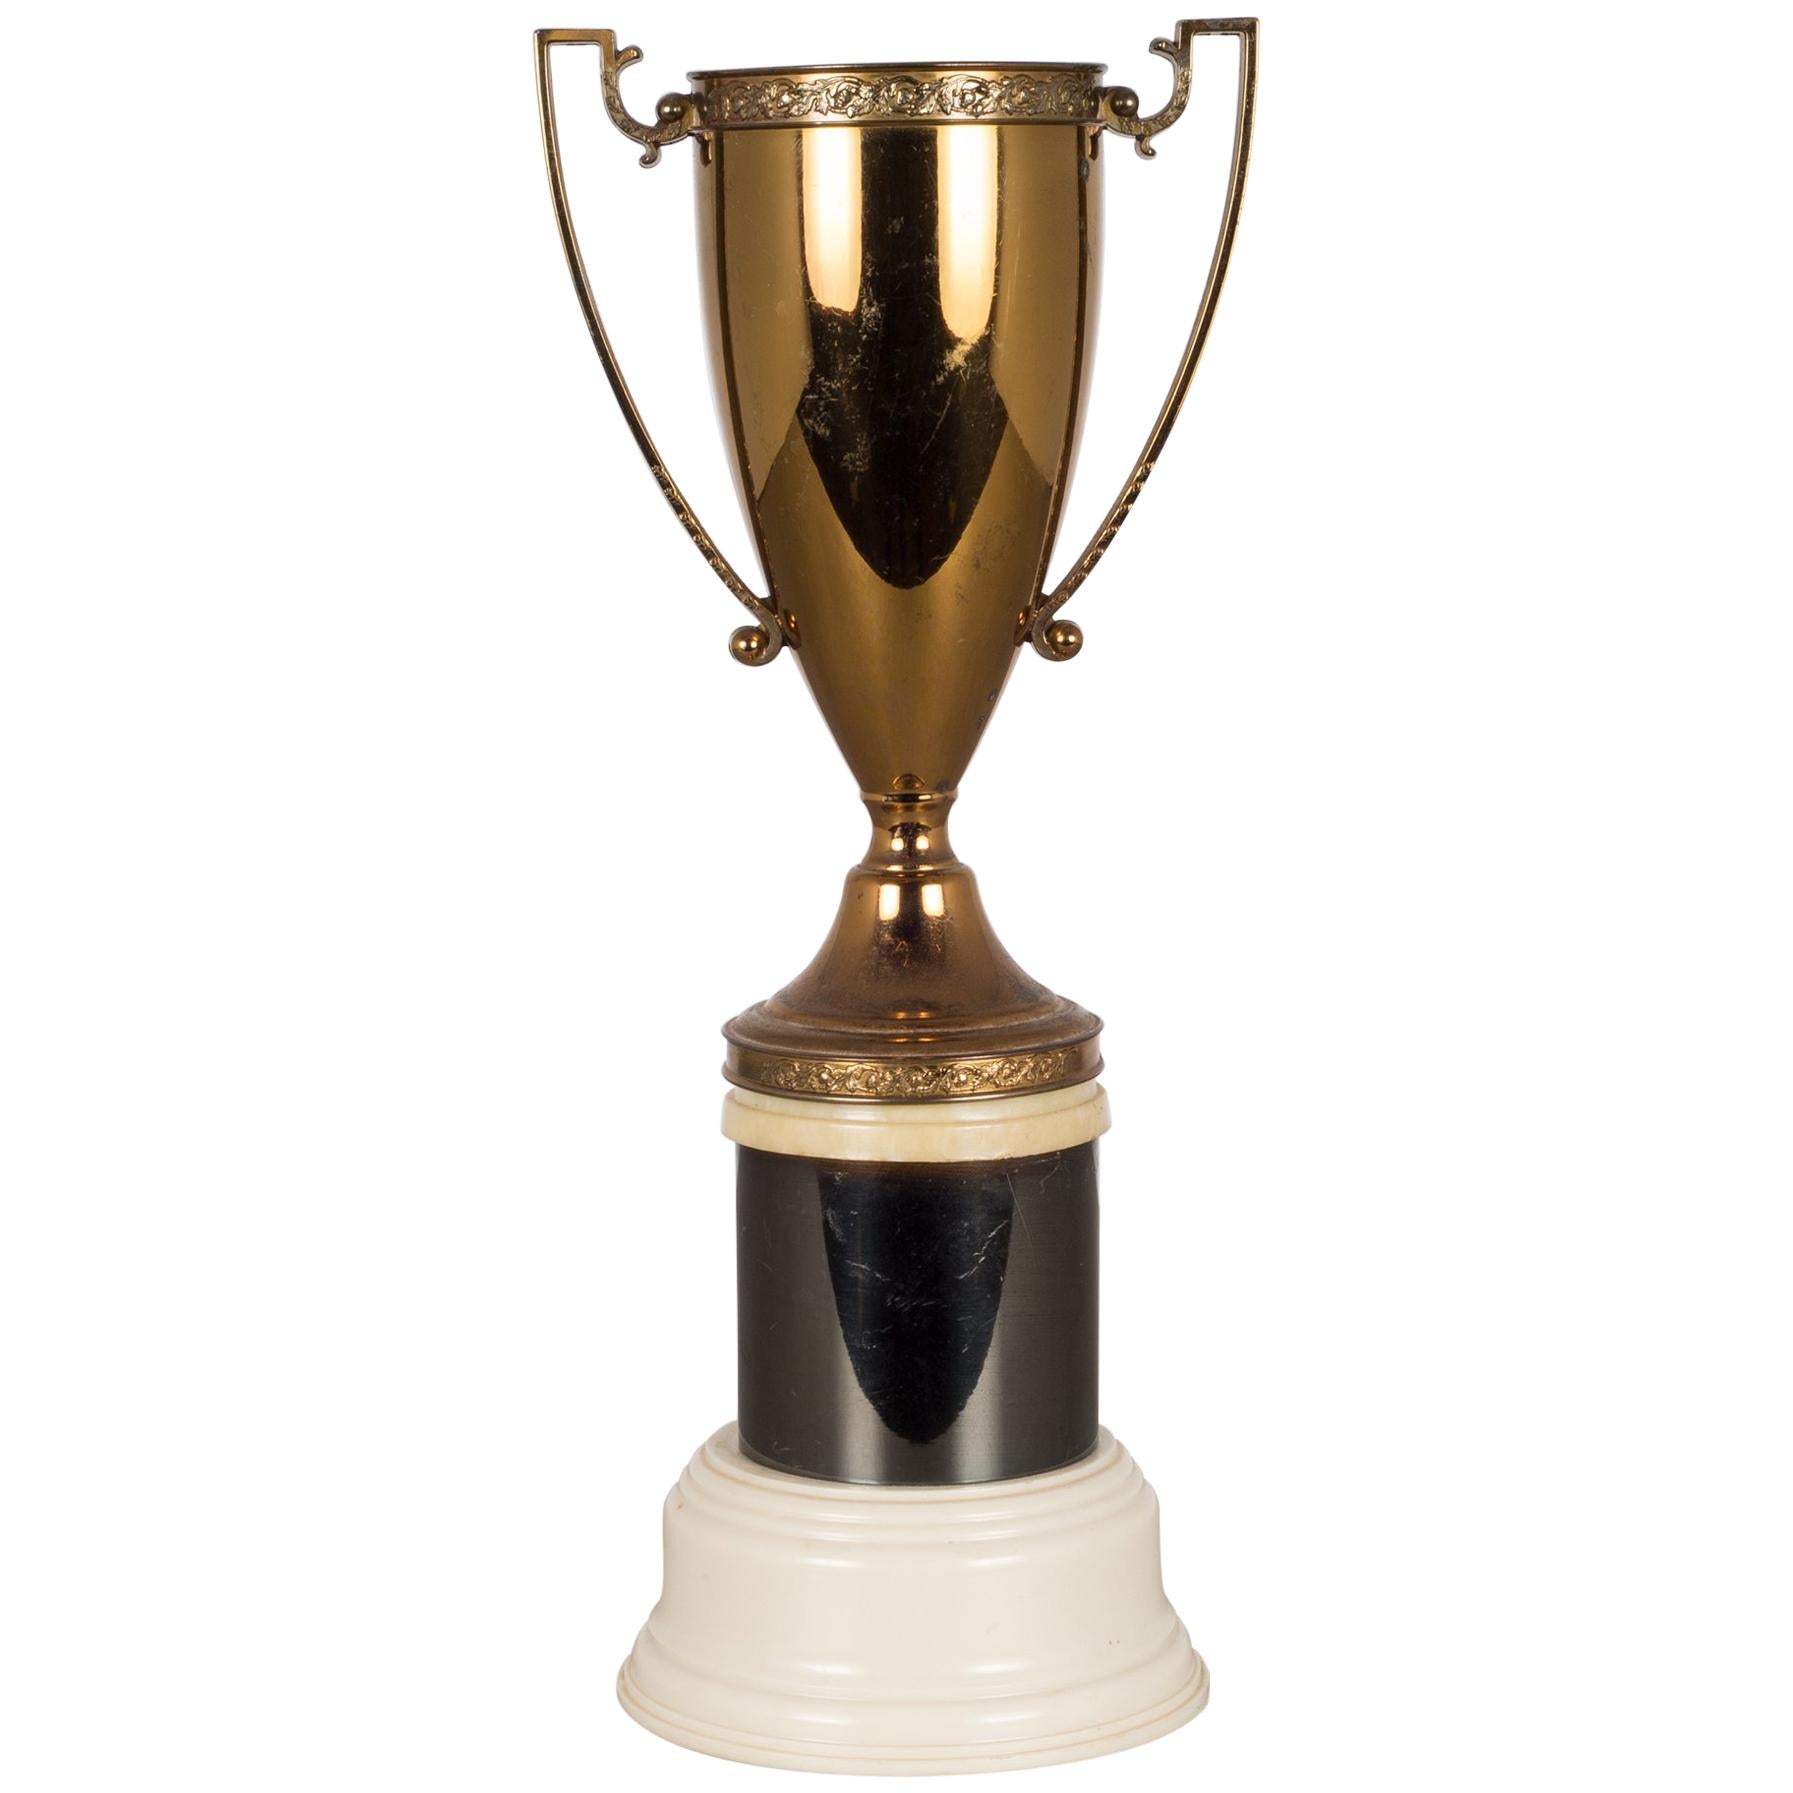 Early 20th Century Solid Brass and Bakelite Loving Cup Trophy, circa 1930s